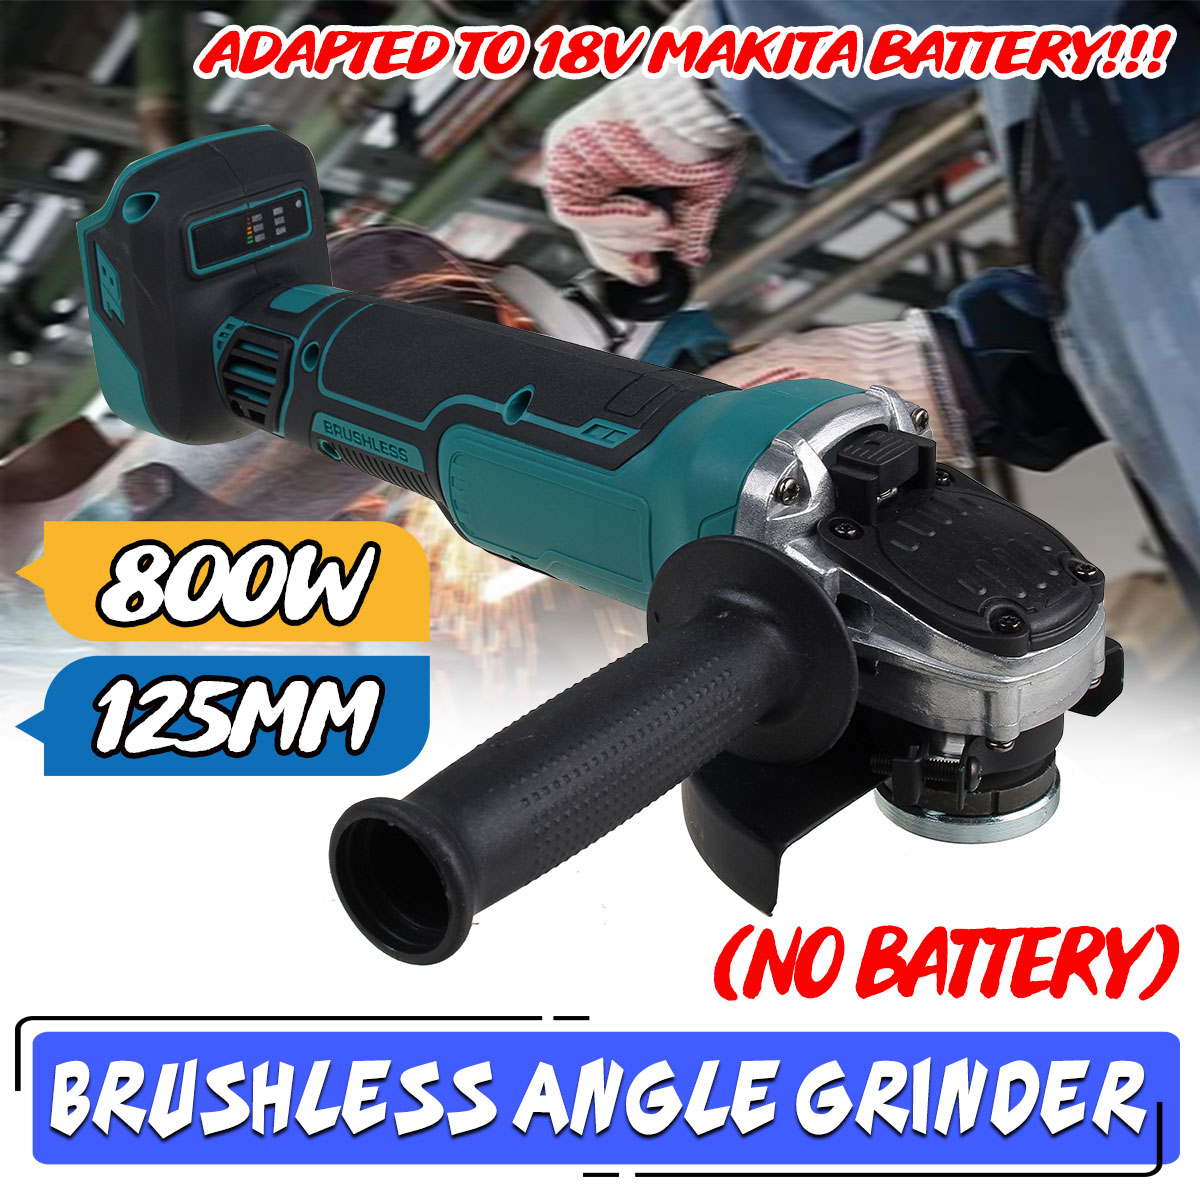 125mm-800W-Cordless-Brushless-Angle-Grinder-Cutting-Tool-Variable-Speed-Electric-Polisher-For-Makita-1825761-2